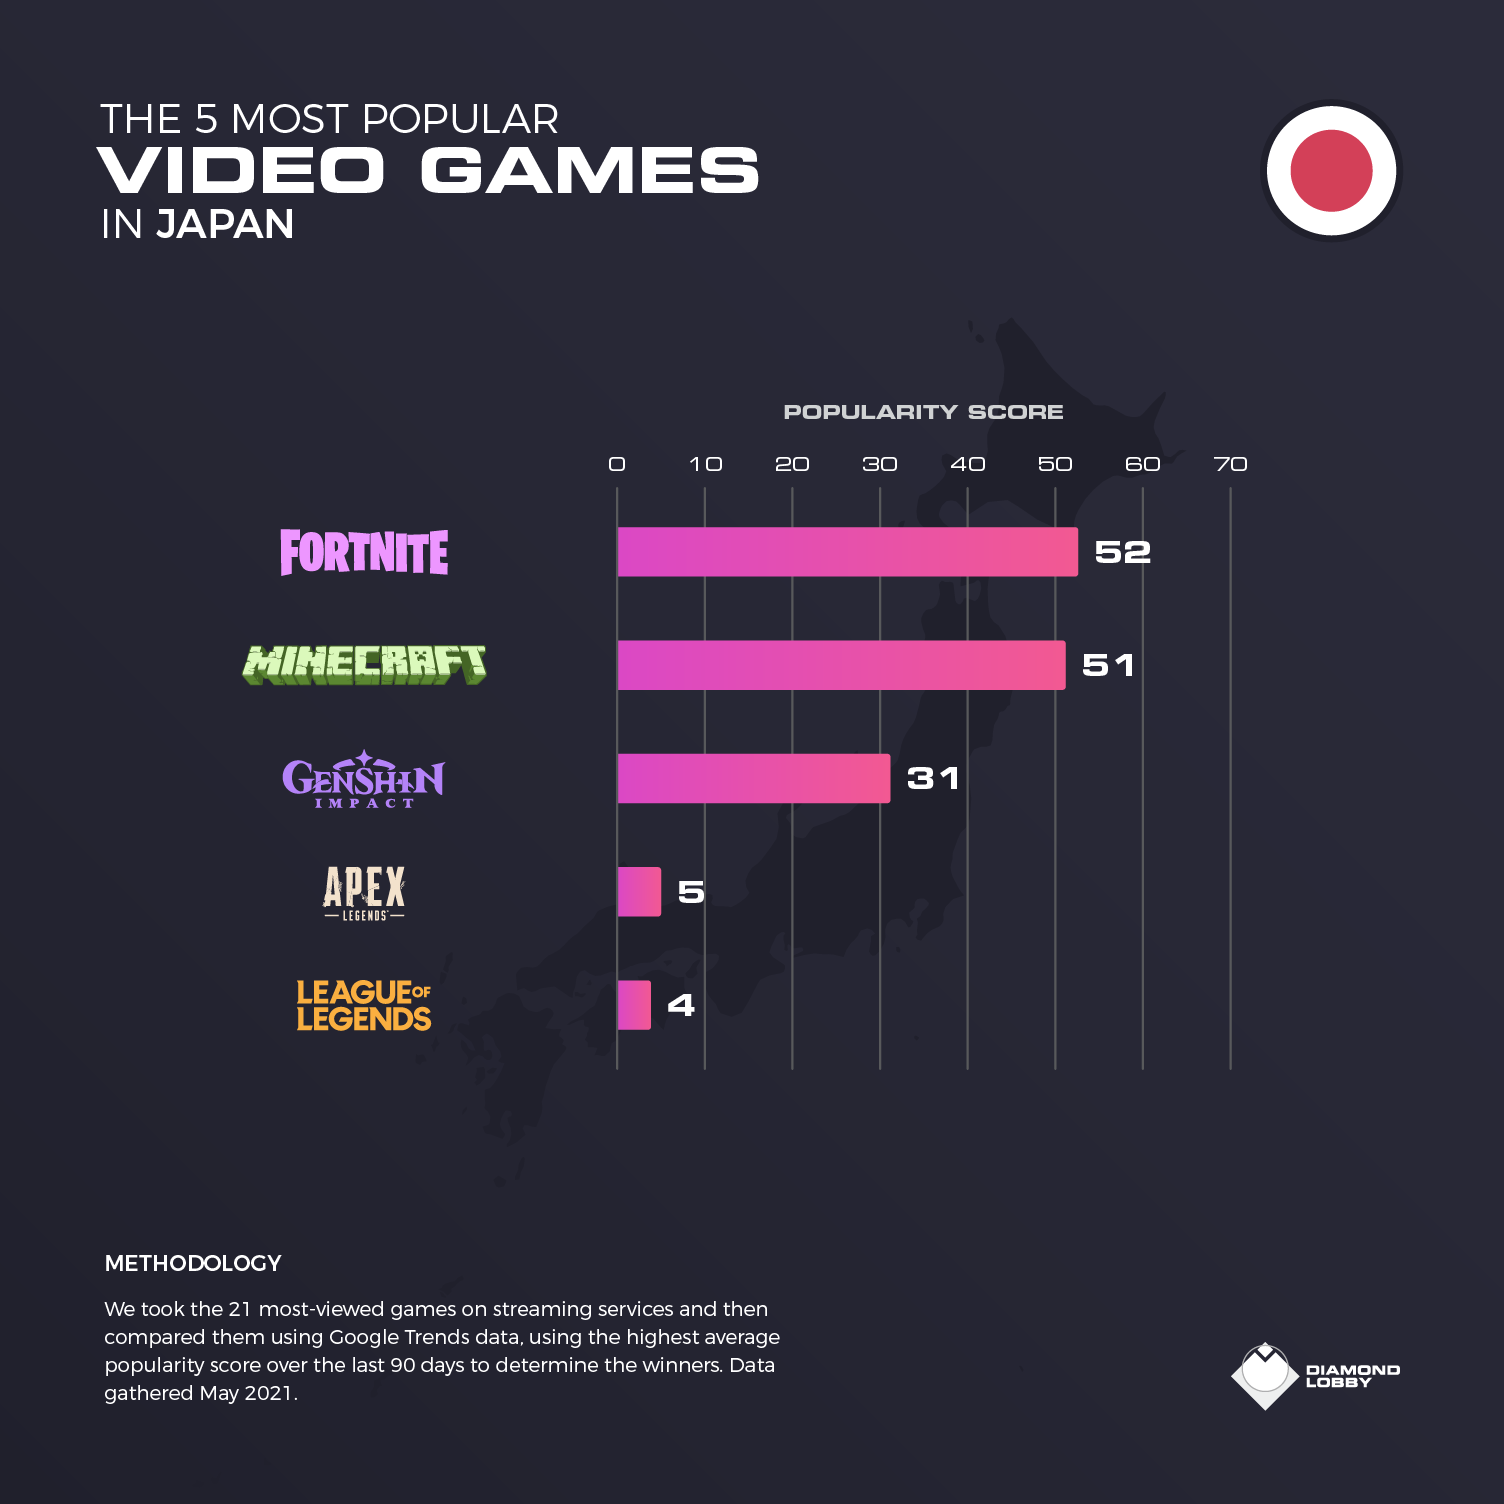 The top 5 video games in Japan